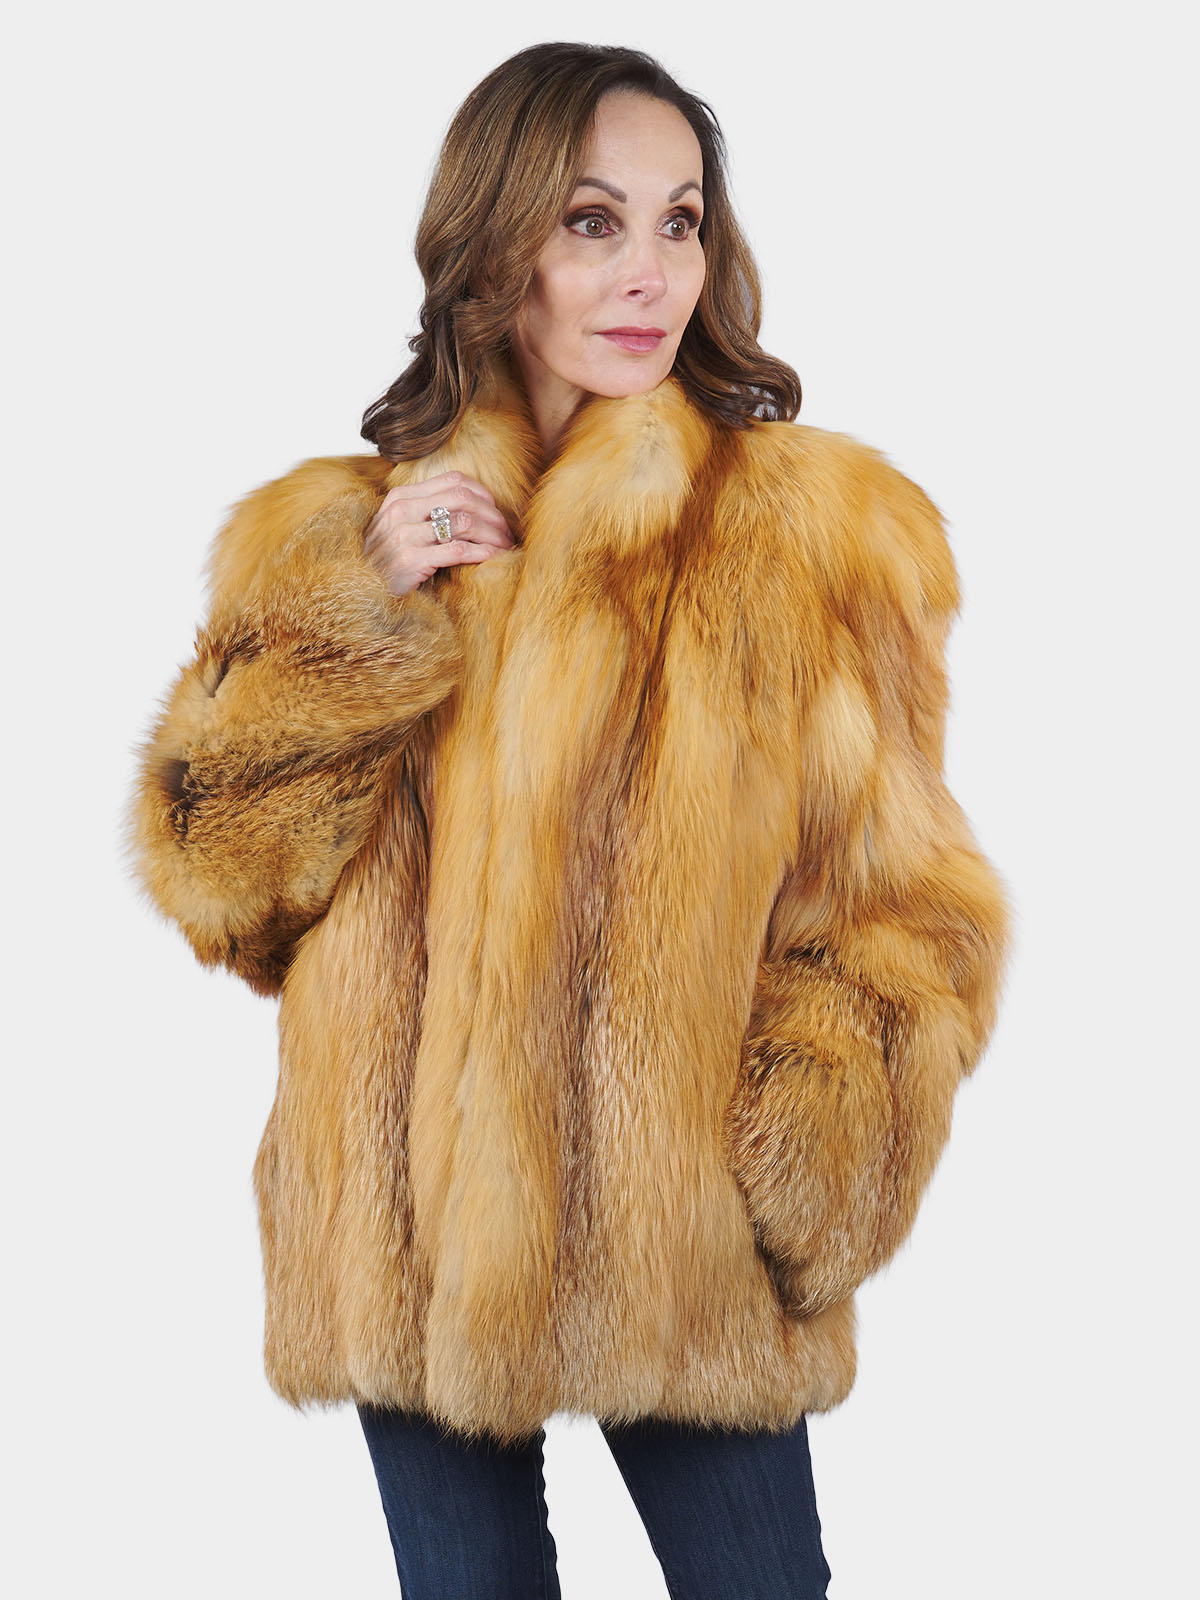 Women Real Blue Fox Fur Coat With Lapel Fashion Winter Natural Fur Thick  Outwear | eBay